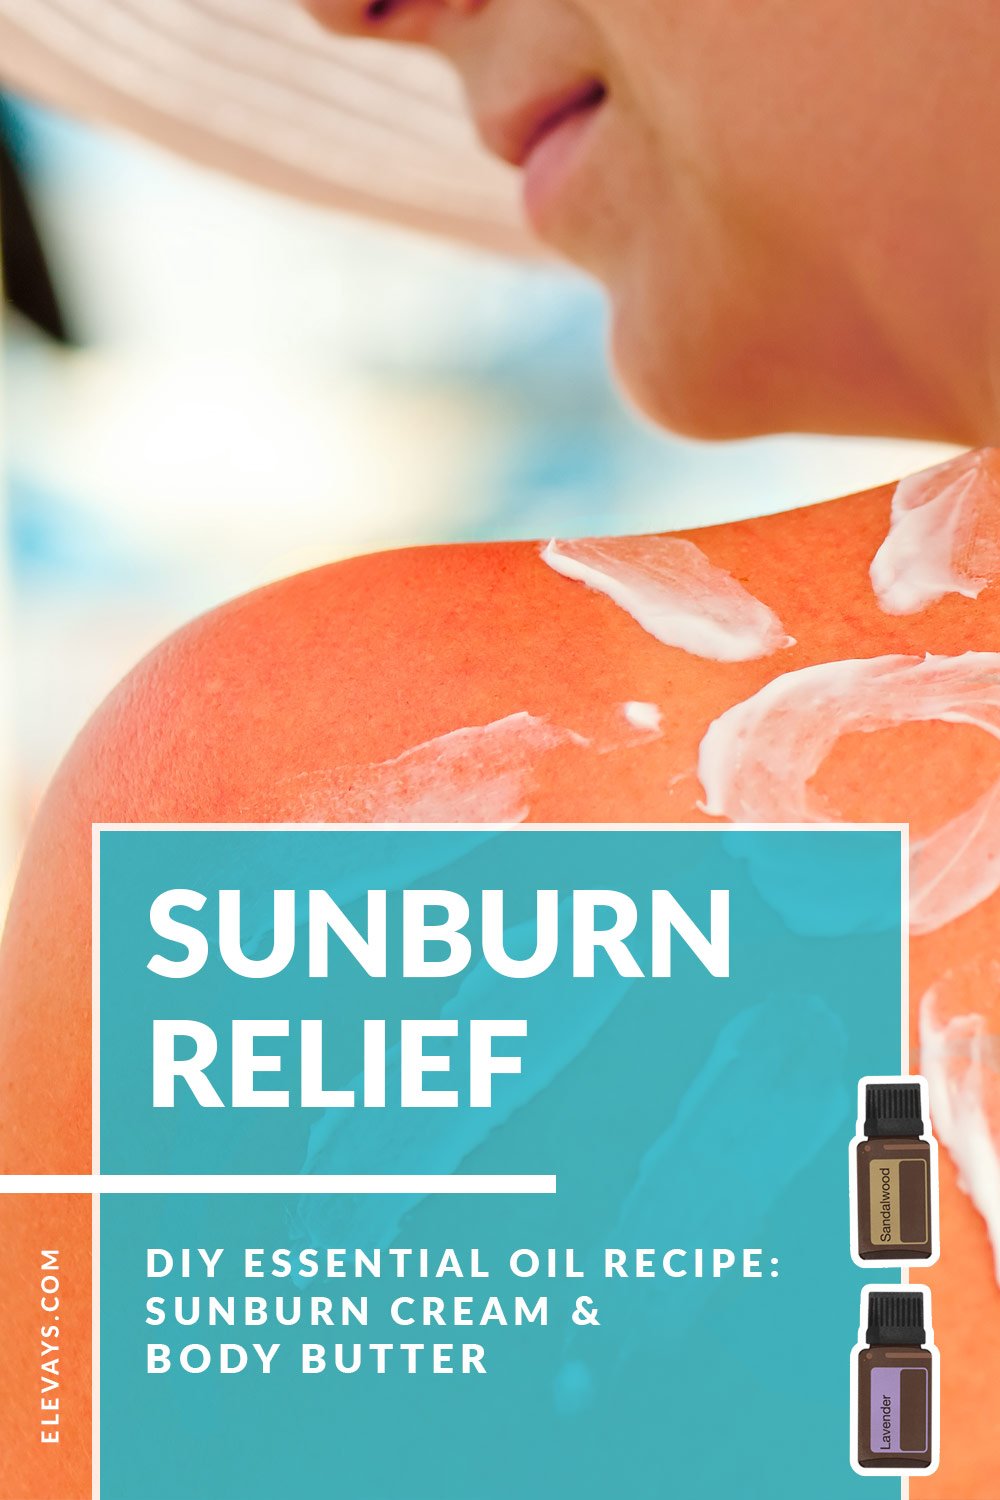 Get Sunburn Relief Fast with this Homemade Sunburn Cream Remedy Infused with Essential Oils